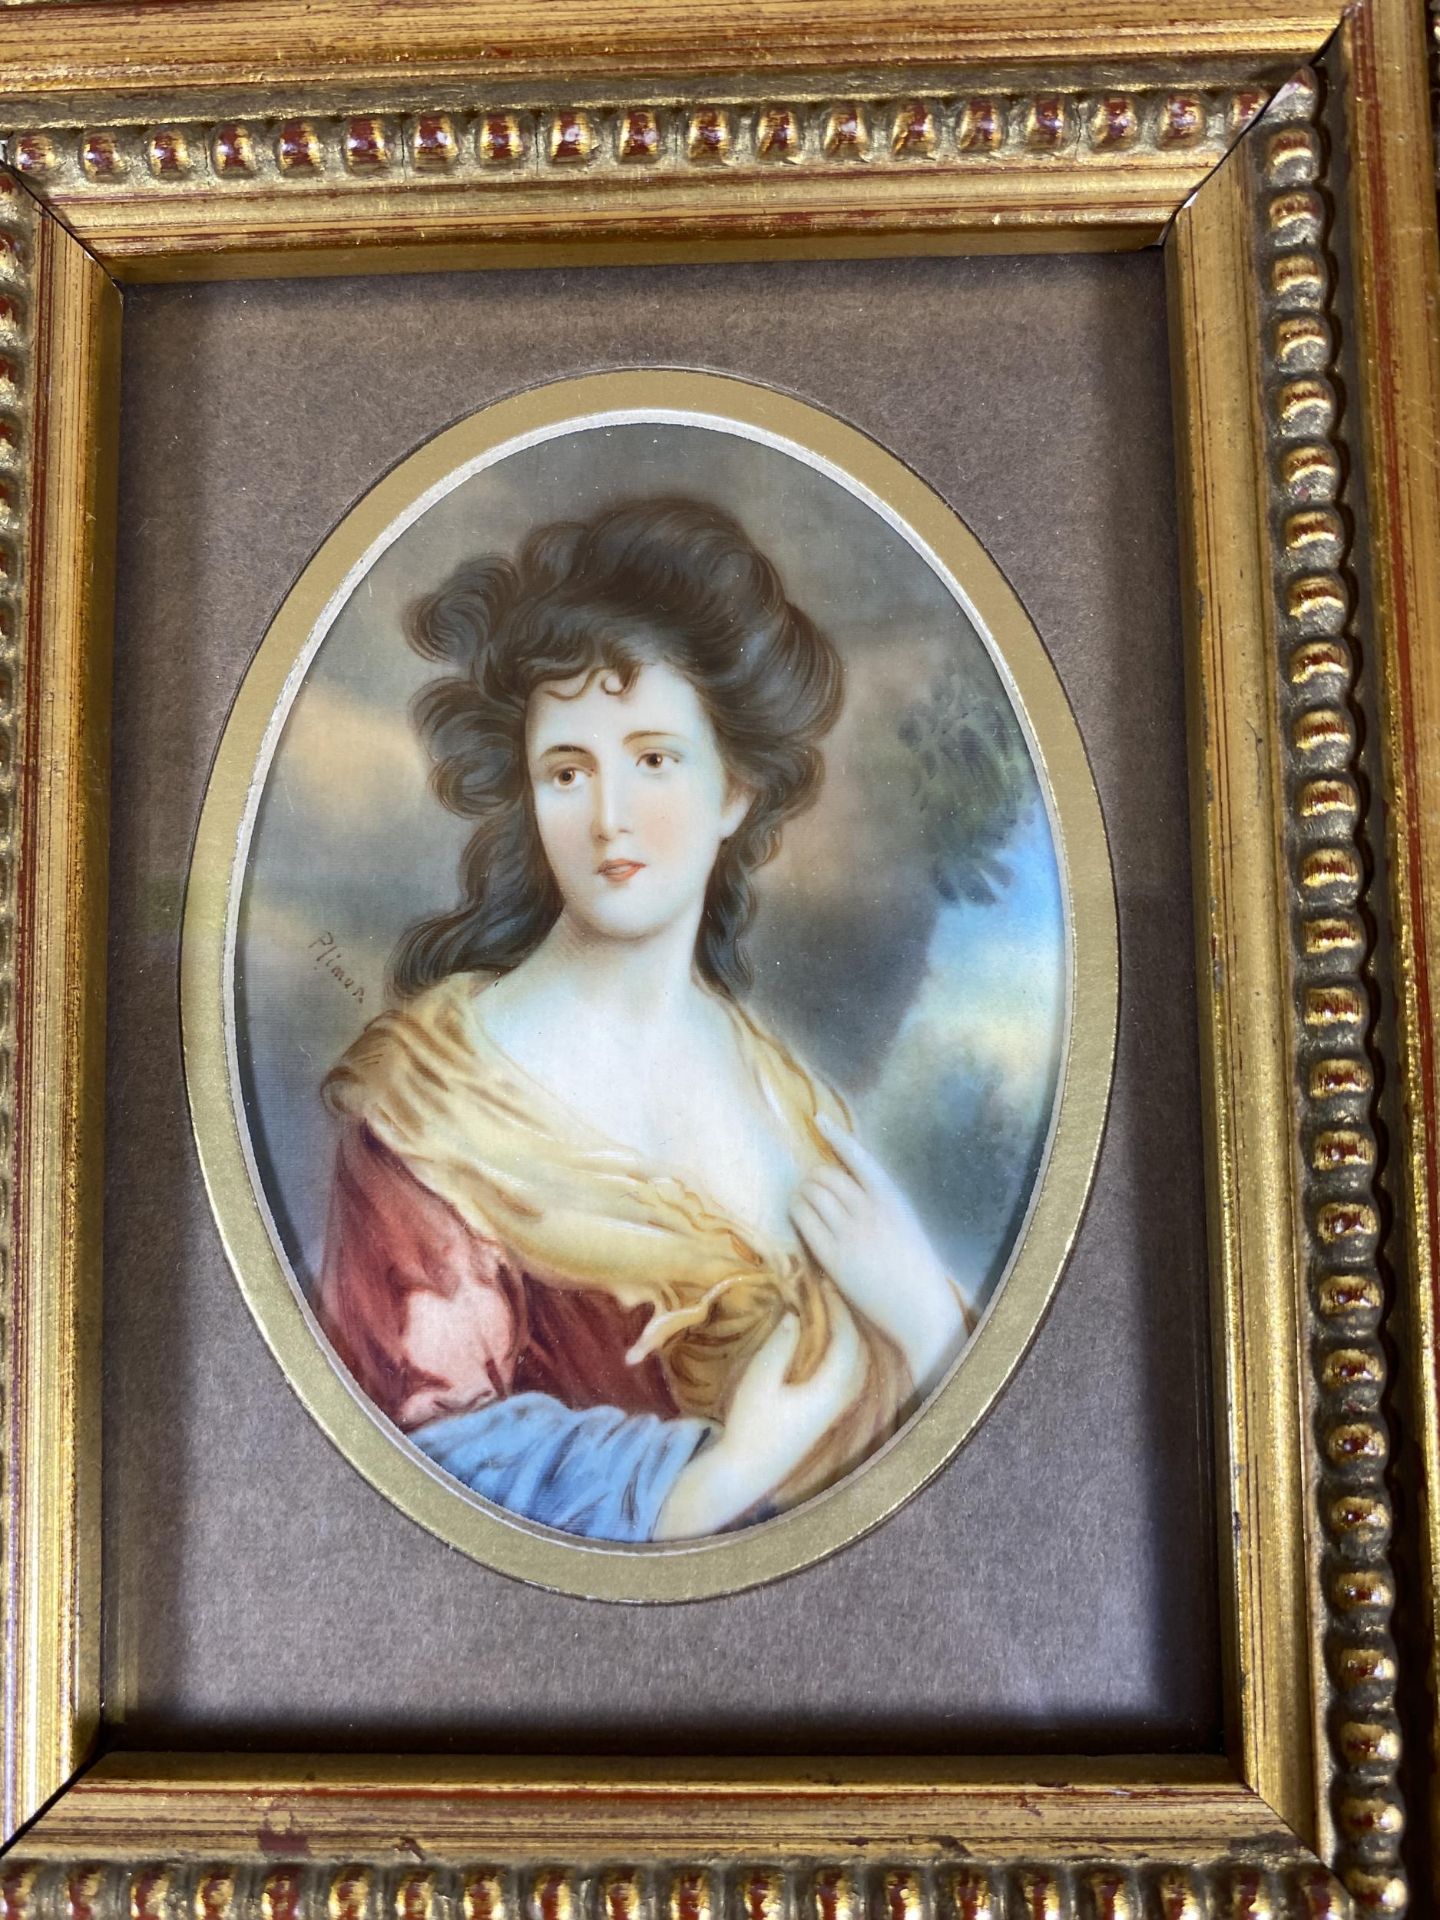 A GEORGIAN 18TH CENTURY HAND PAINTED PORTRAIT OF A LADY, SIGNED 'PLIMON' AND DATED TO THE REVERSE, - Image 2 of 9